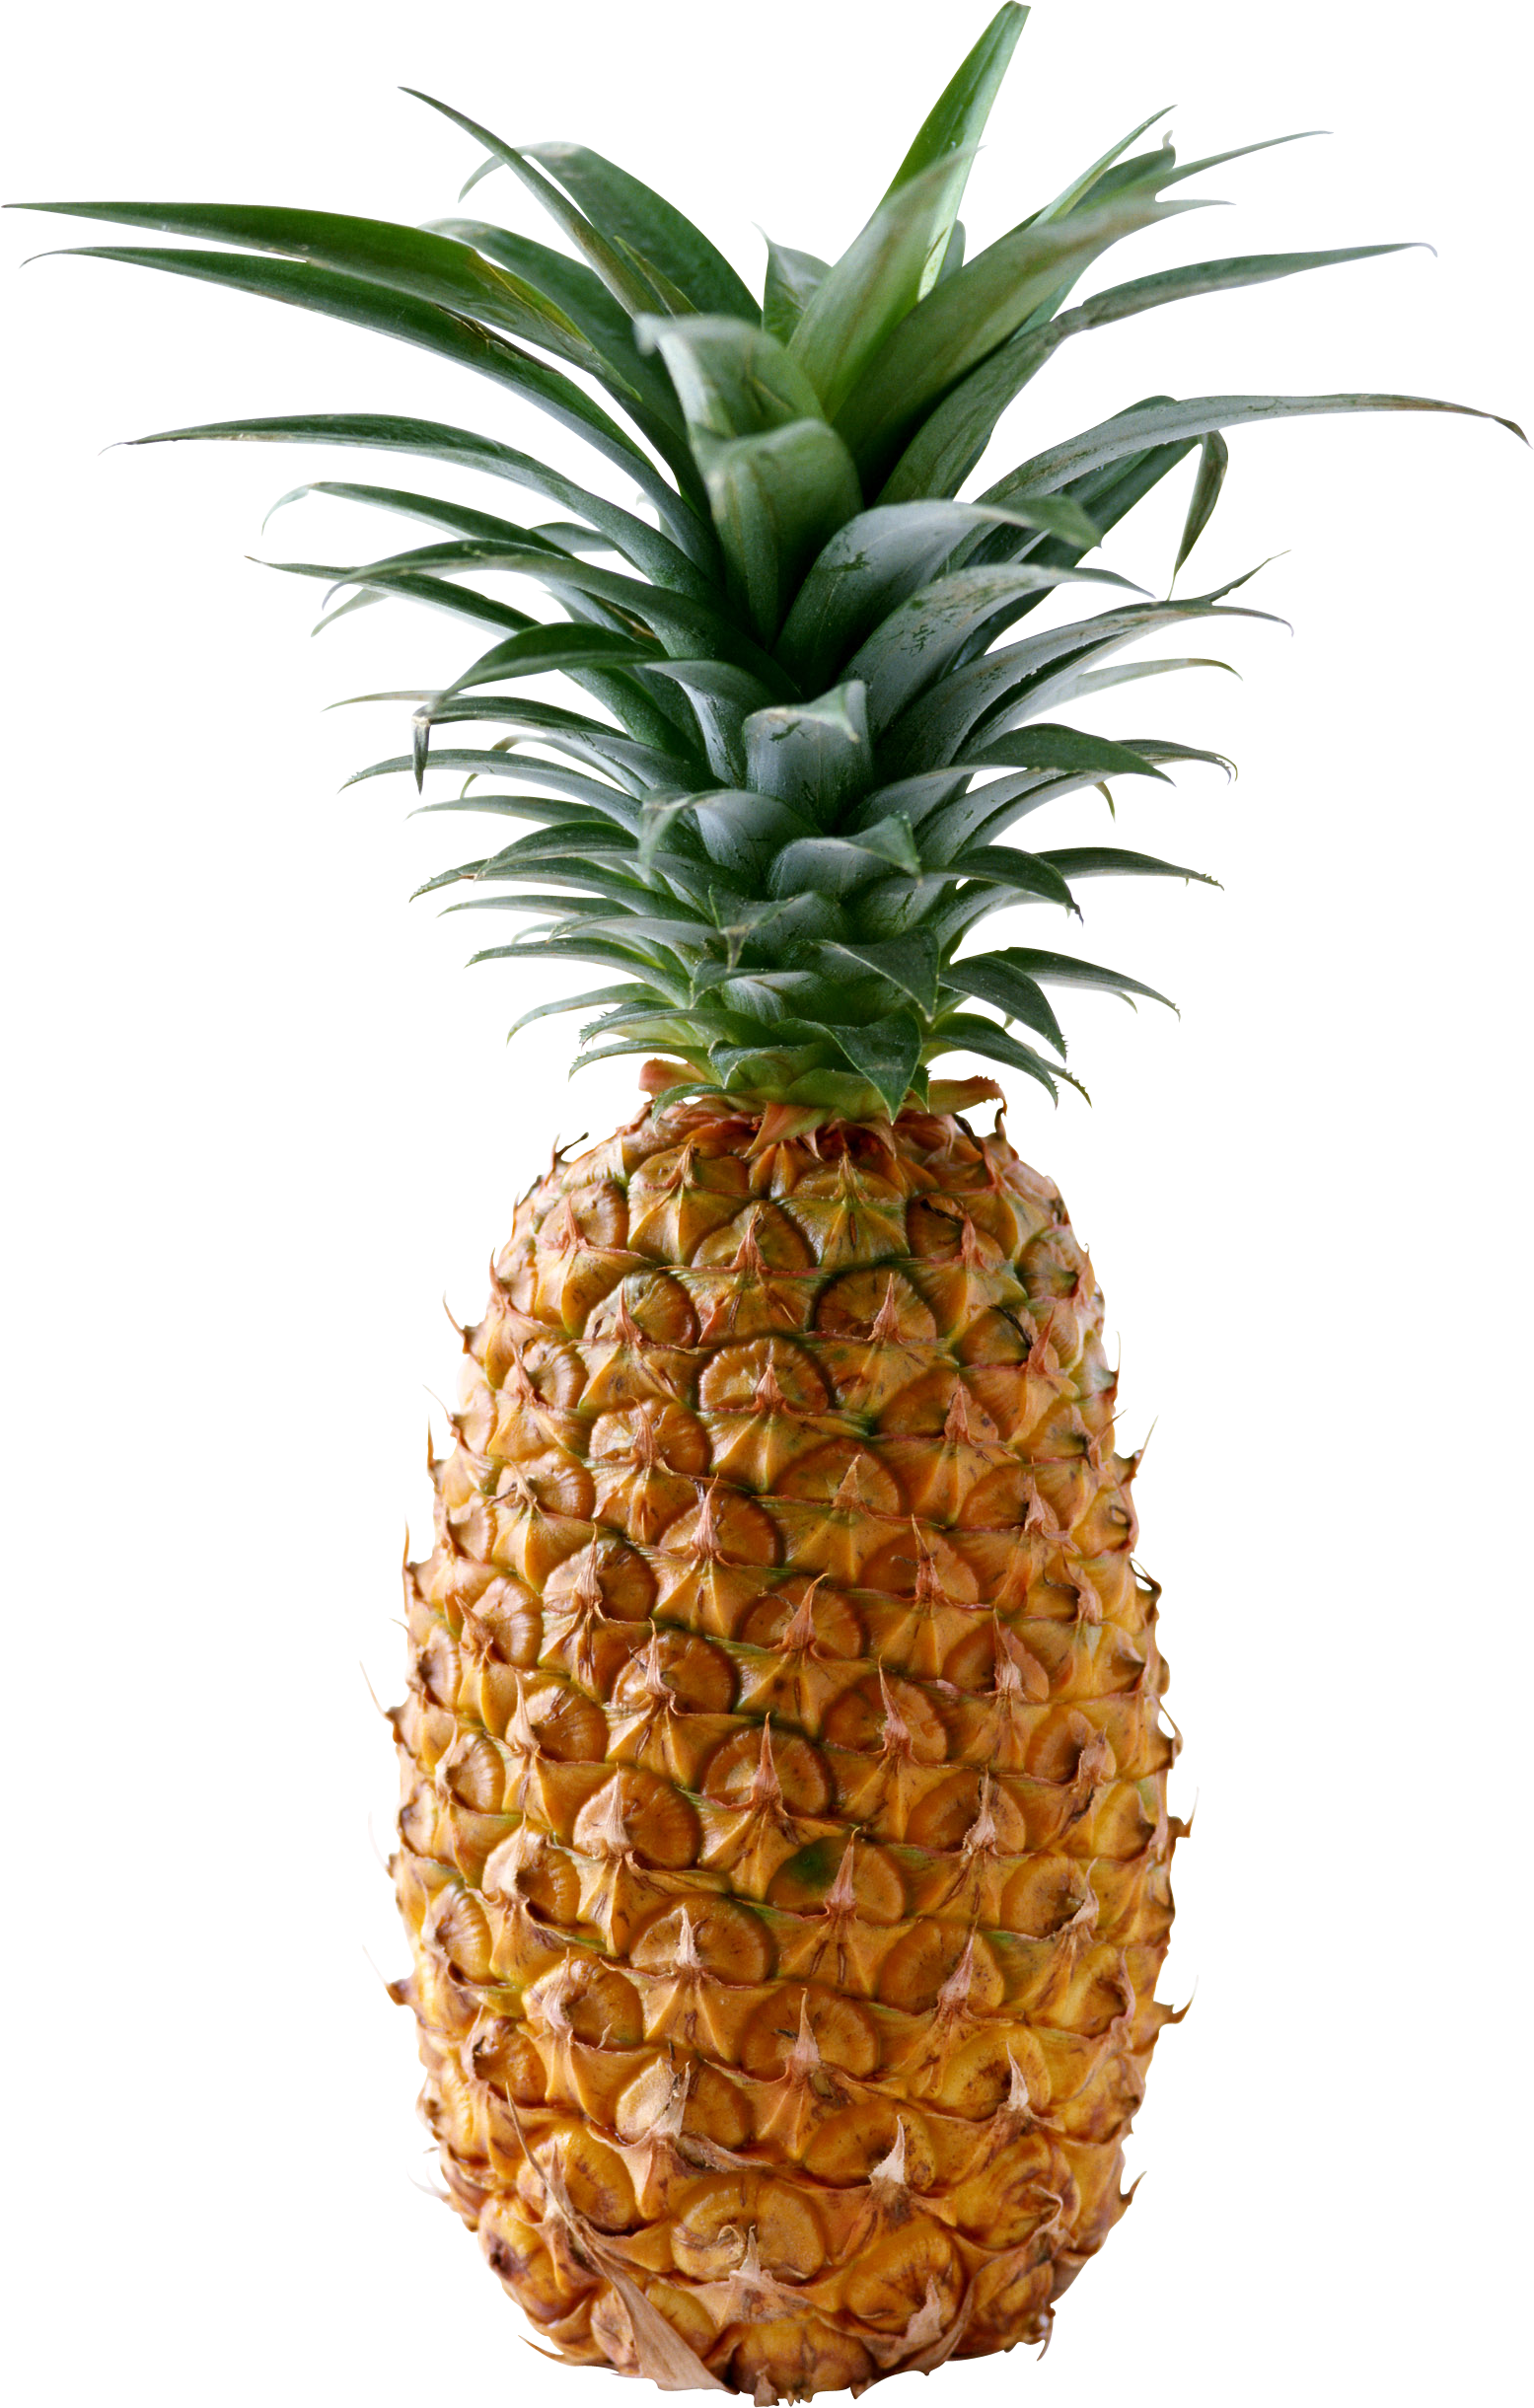 Clipart vegetables vegy. Pineapple png image free